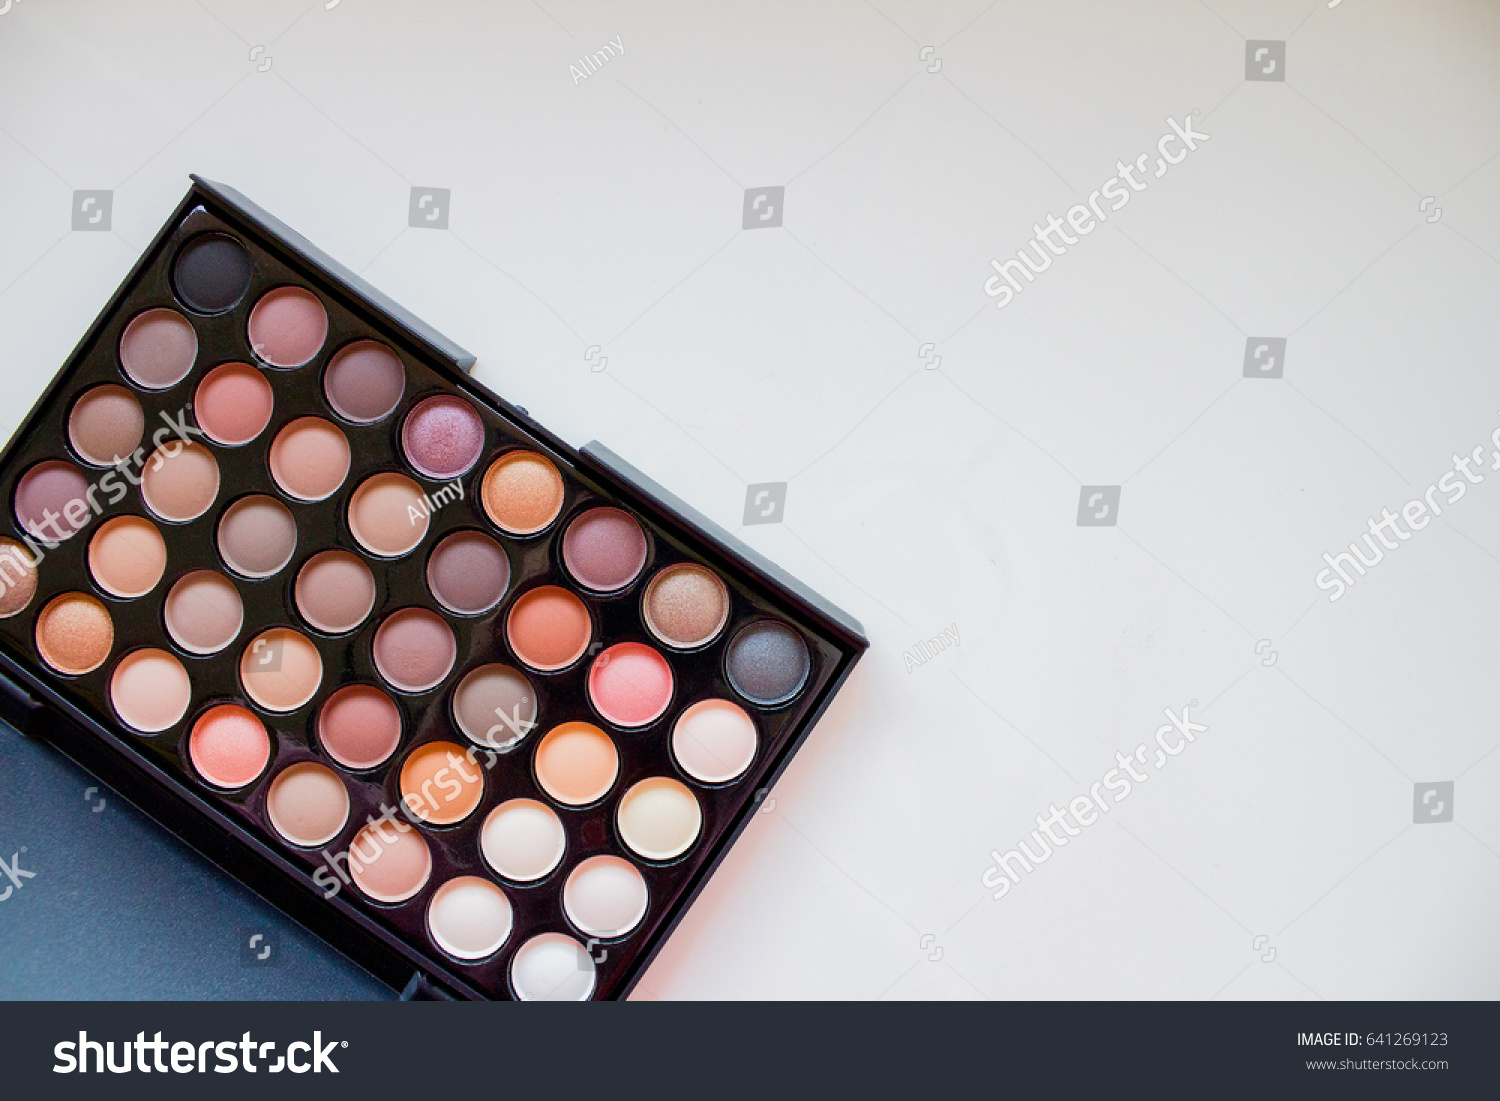 Female palette for eye shadows with different colors
 #641269123